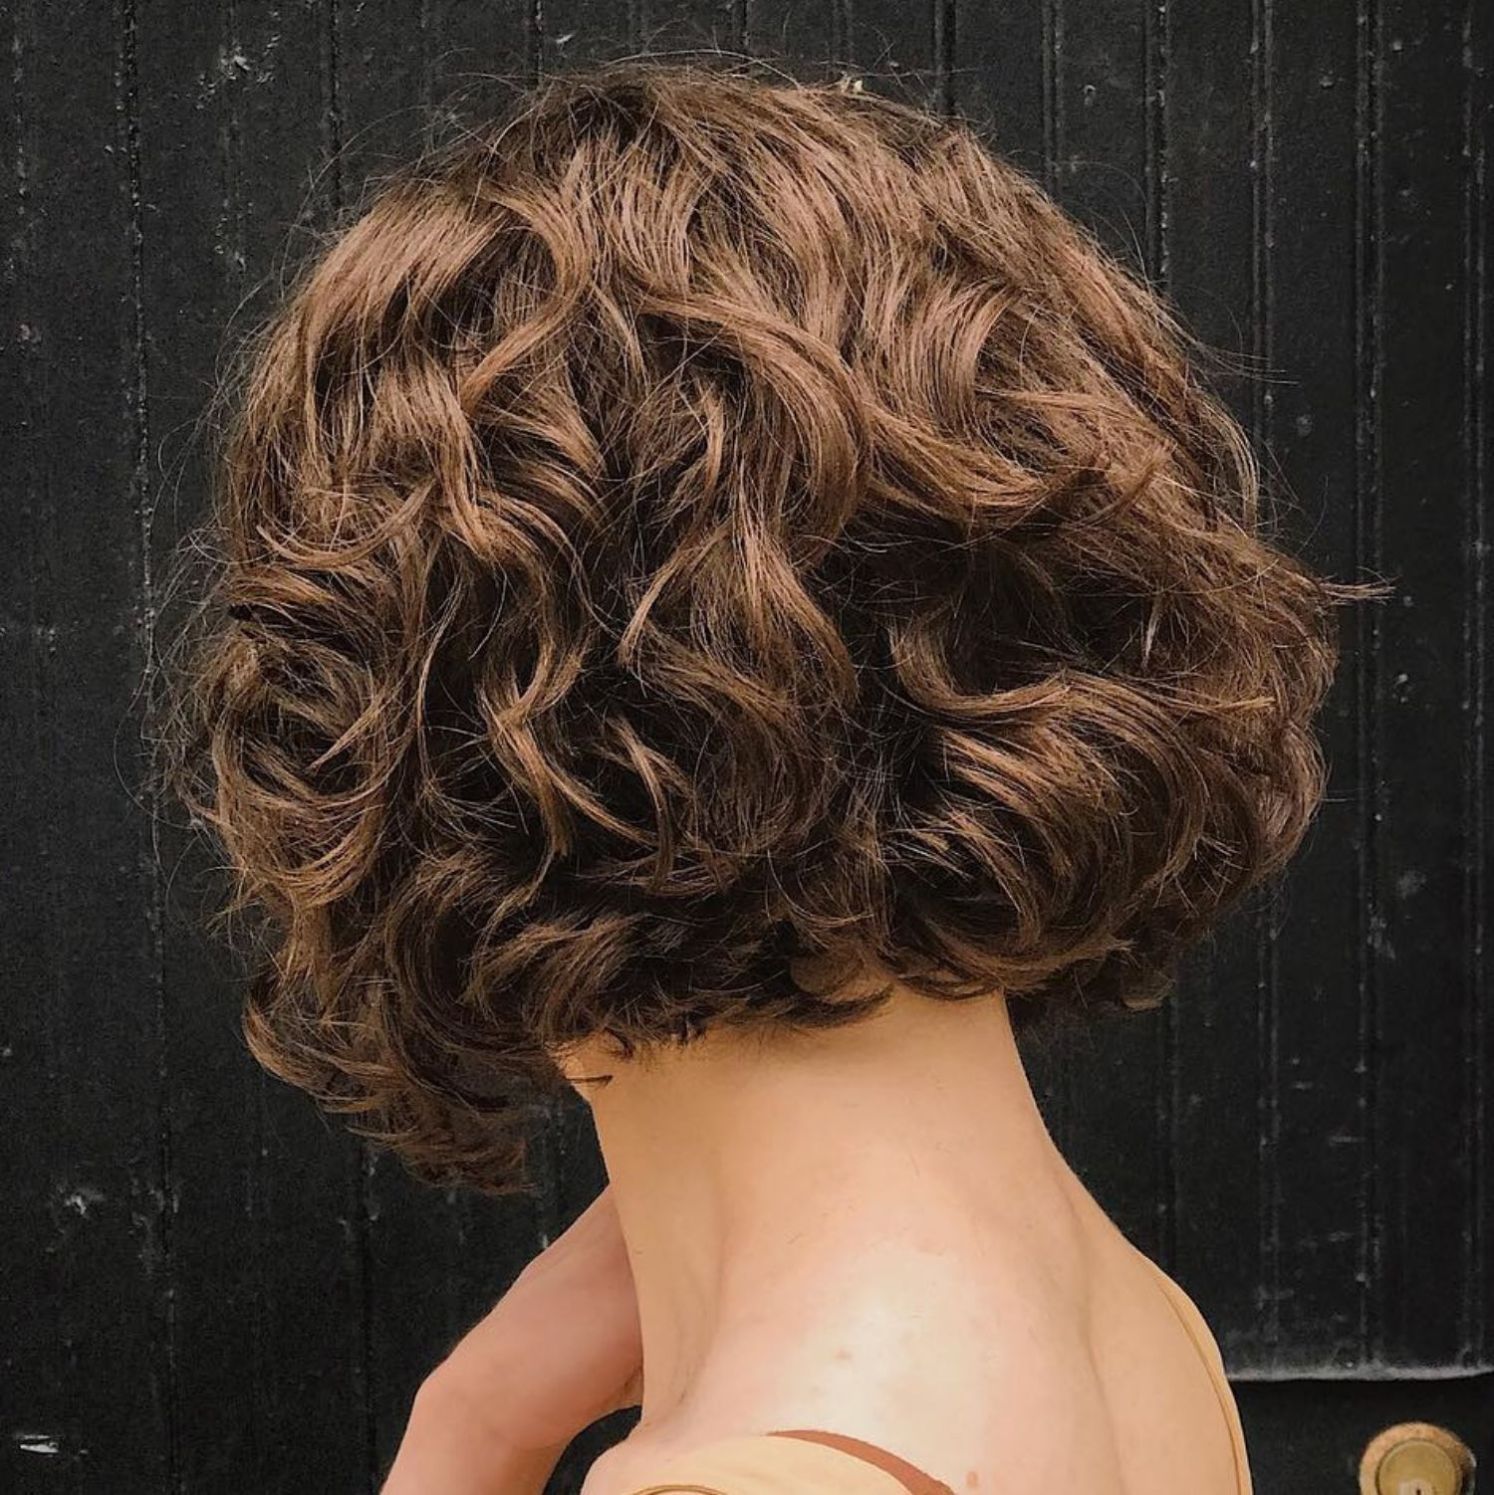 55 Different Versions of Curly Bob Hairstyle -   24 short style brown
 ideas